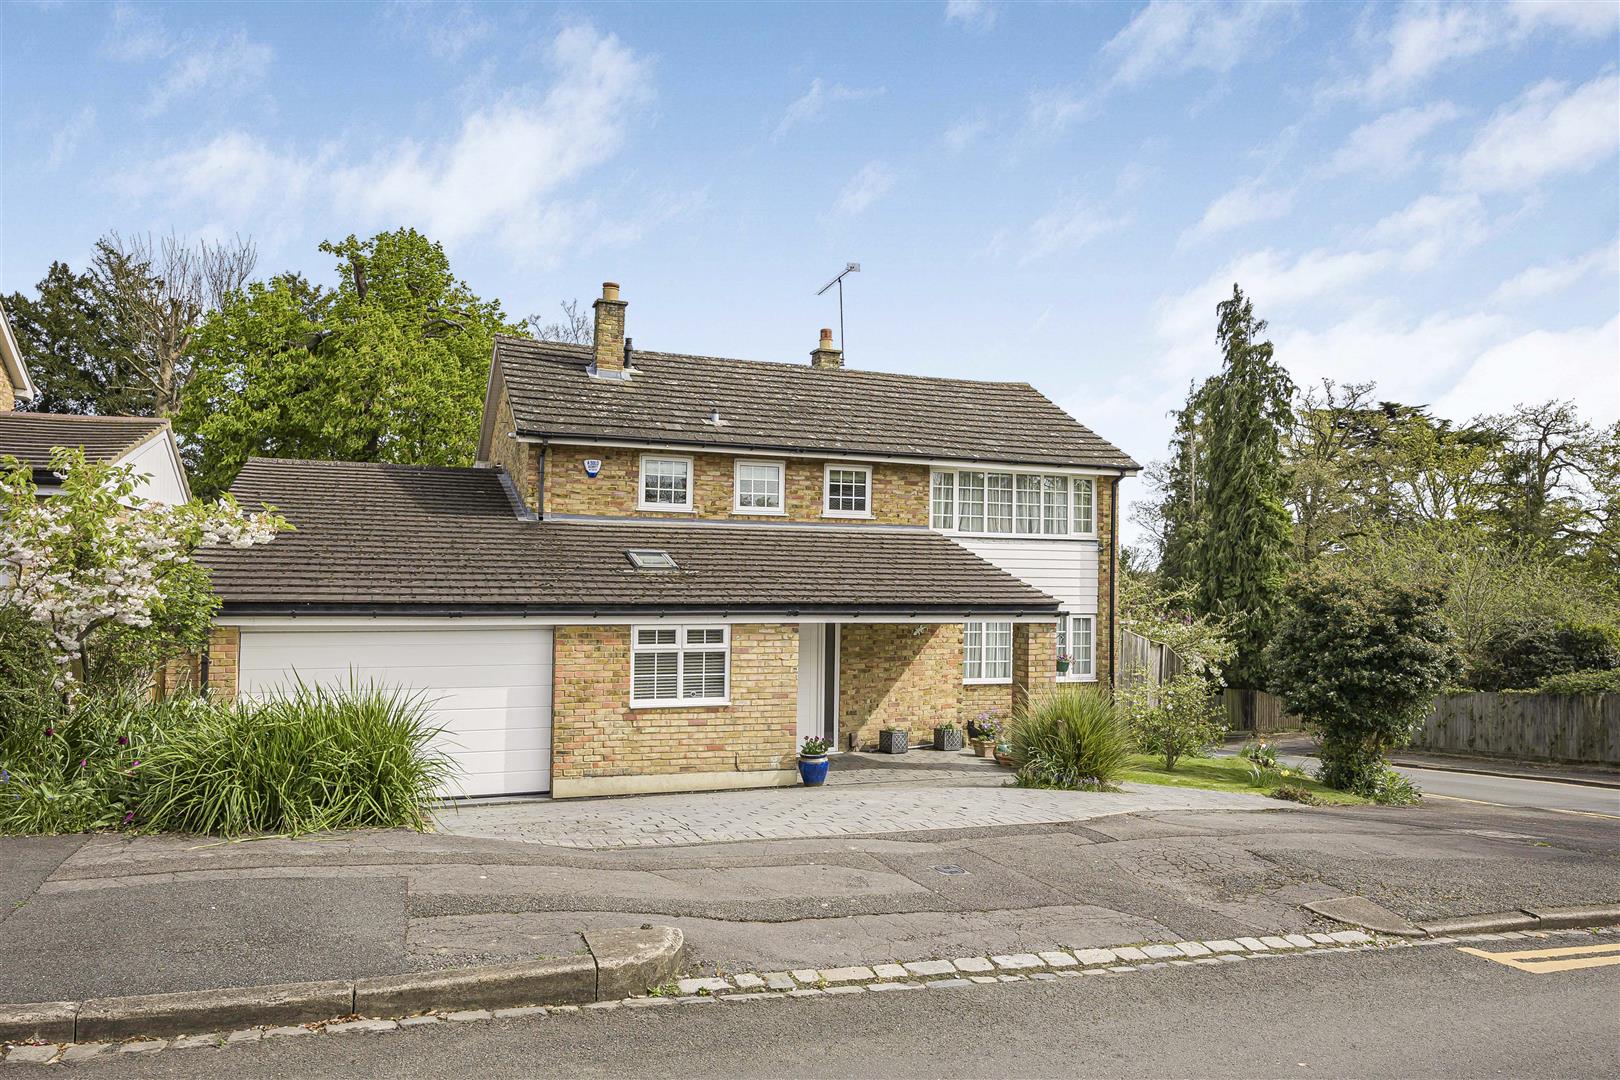 Picton Way Caversham house for sale in Reading